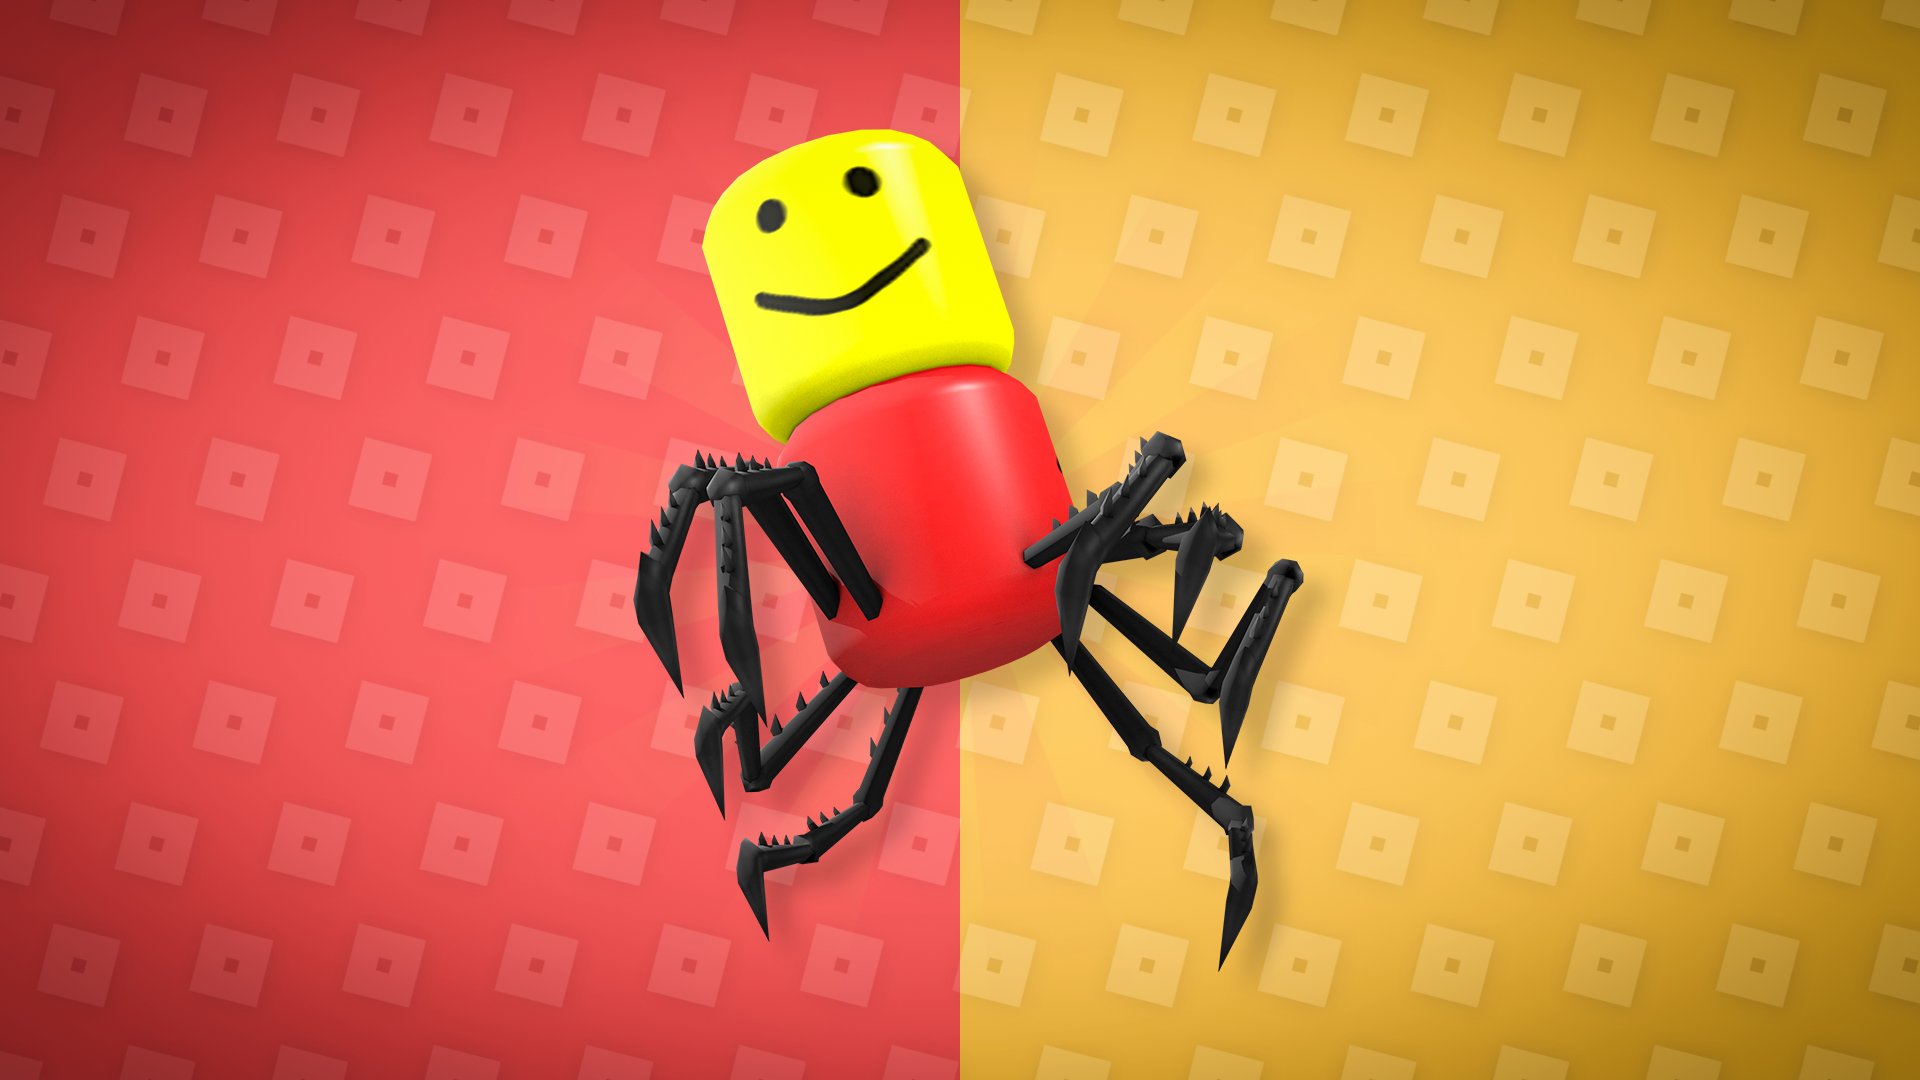 Rbxnews On Twitter Soon When You Purchase Roblox Gift Cards Directly From The Official Site You May Receive The Hanging Despacito Spider Through A Bonus Code Official Site Https T Co Vmbd6lbqjx Hanging Despacito Spider - roblox despacito spider